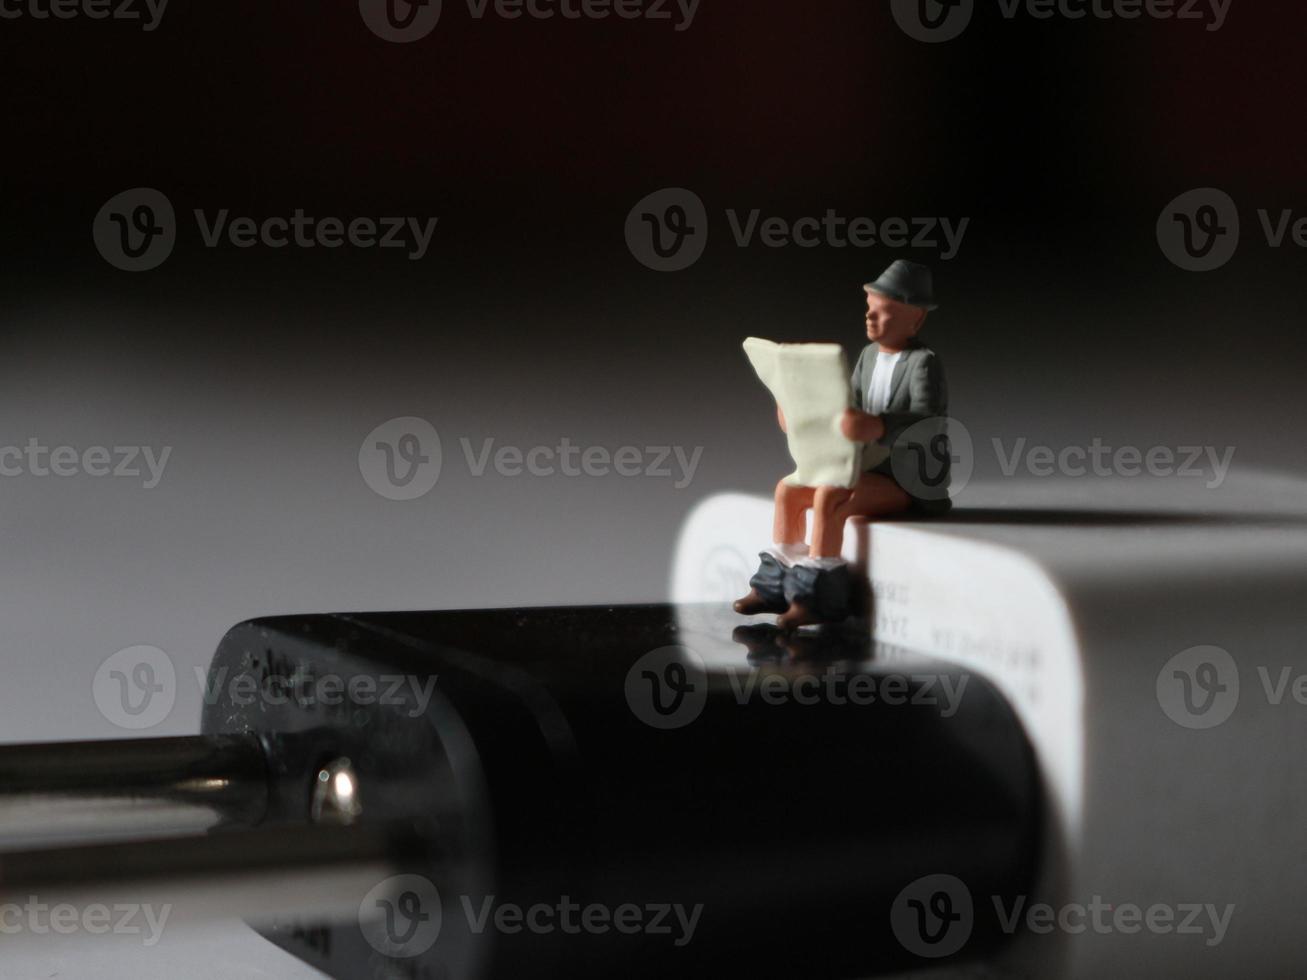 a close up of a miniature figure of a person reading above a cell phone charger. photo